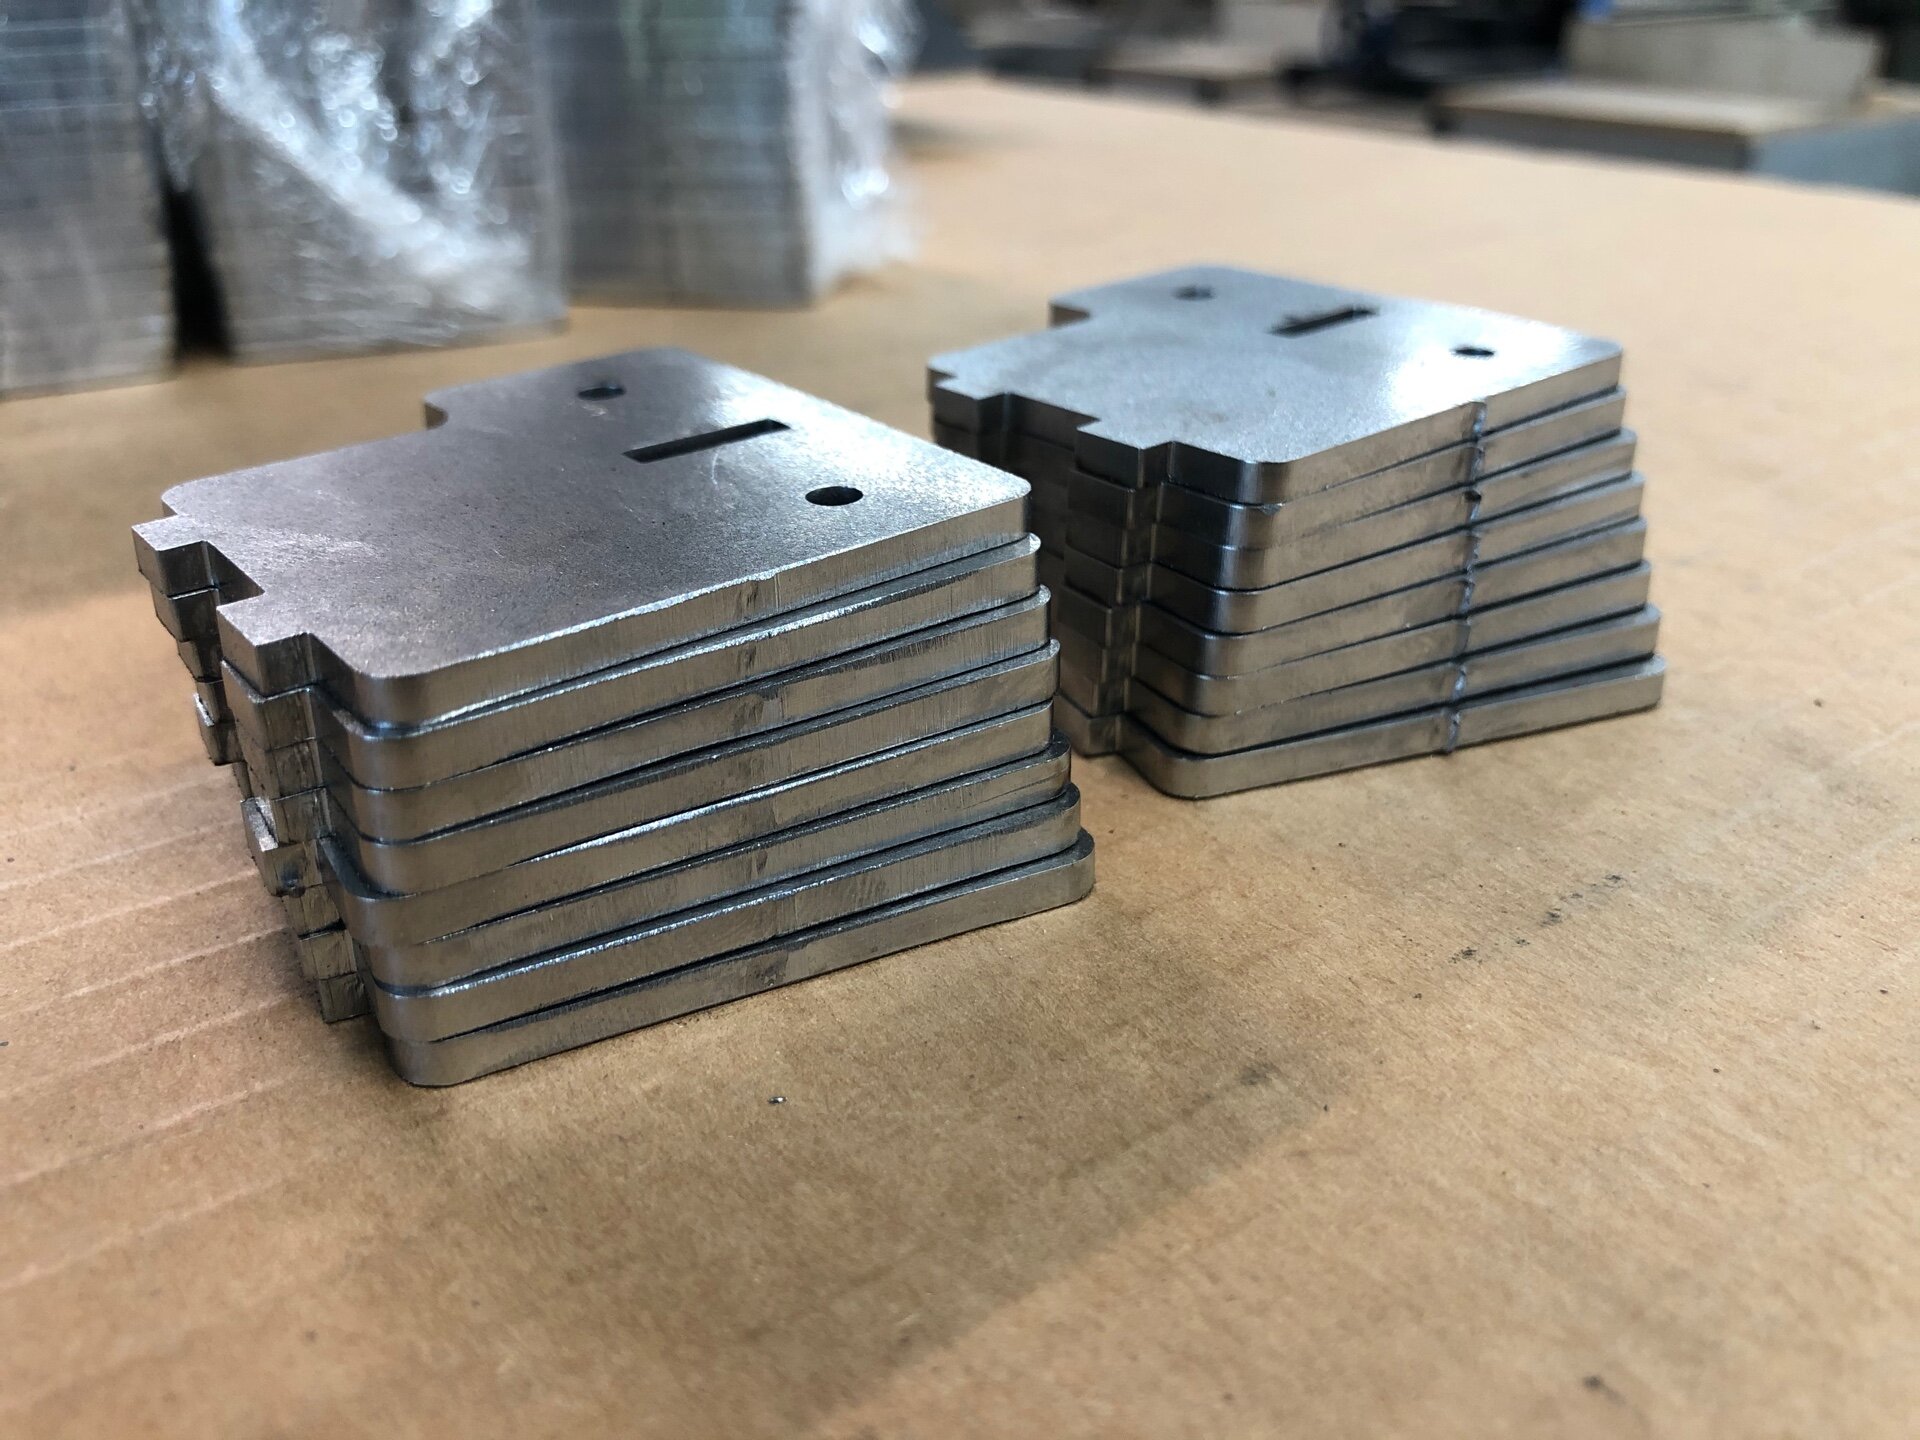 Small laser-cut pieces before welding